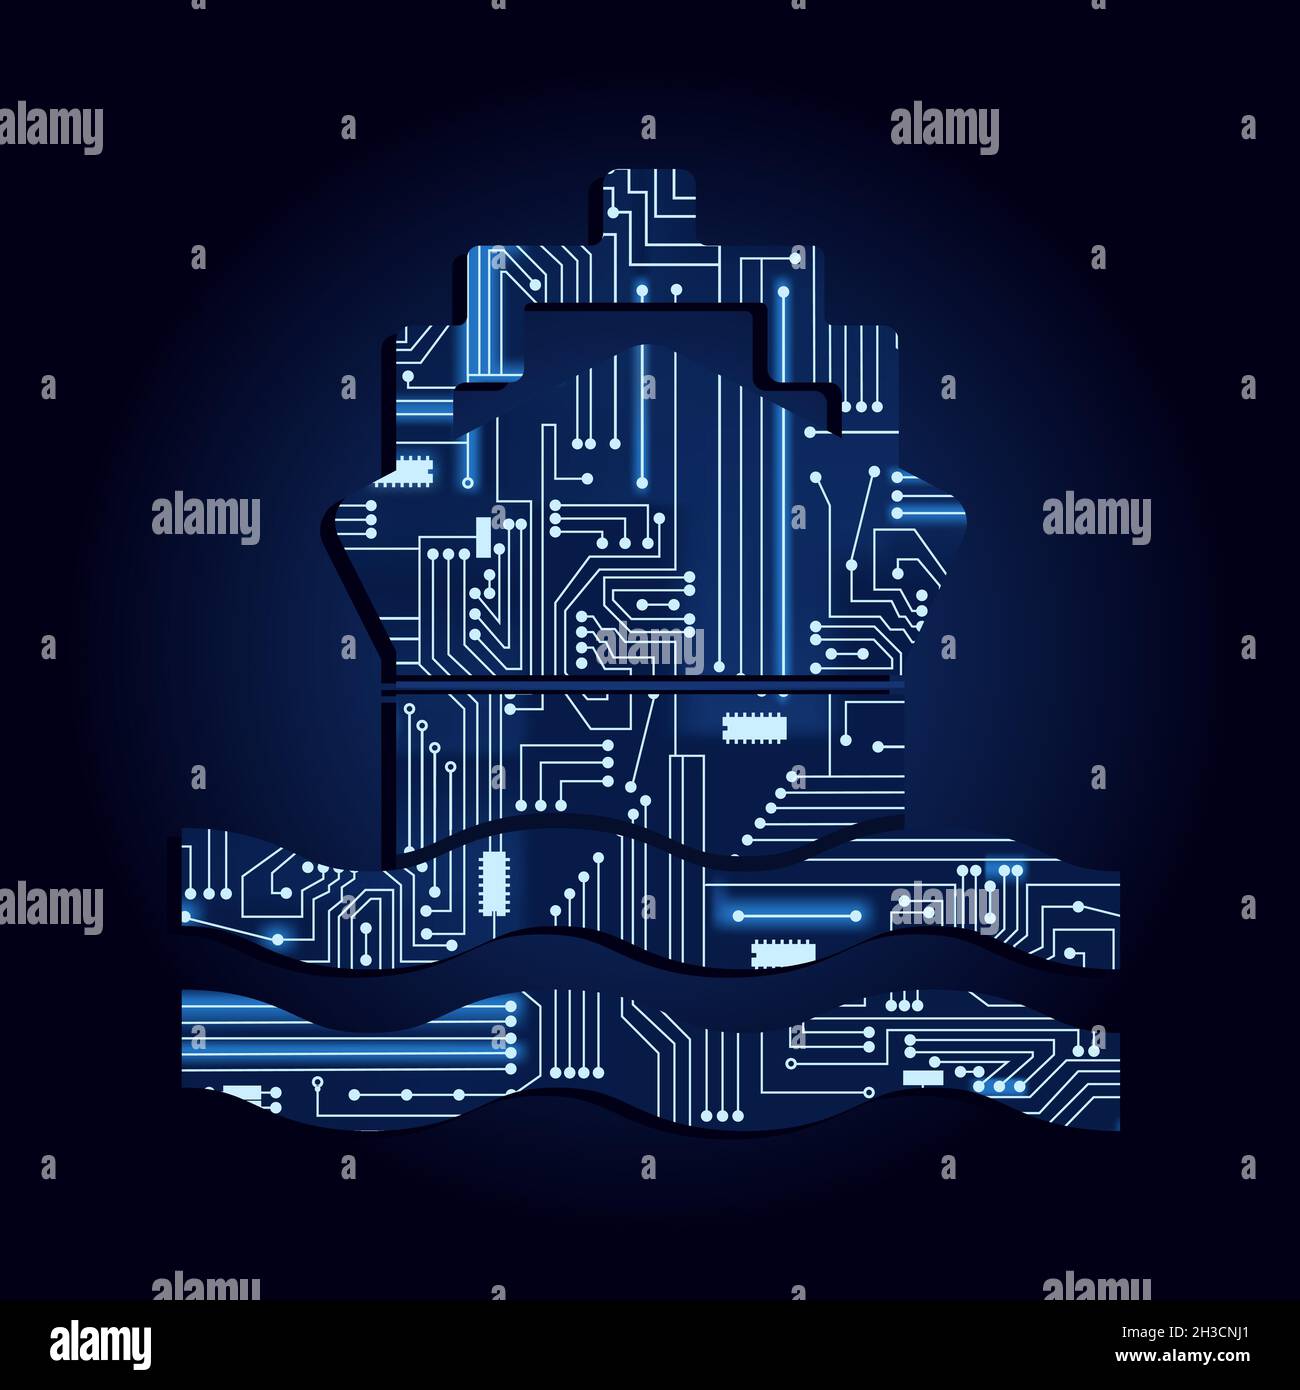 Ship symbol with a technological electronics circuit. Blue background. Stock Vector